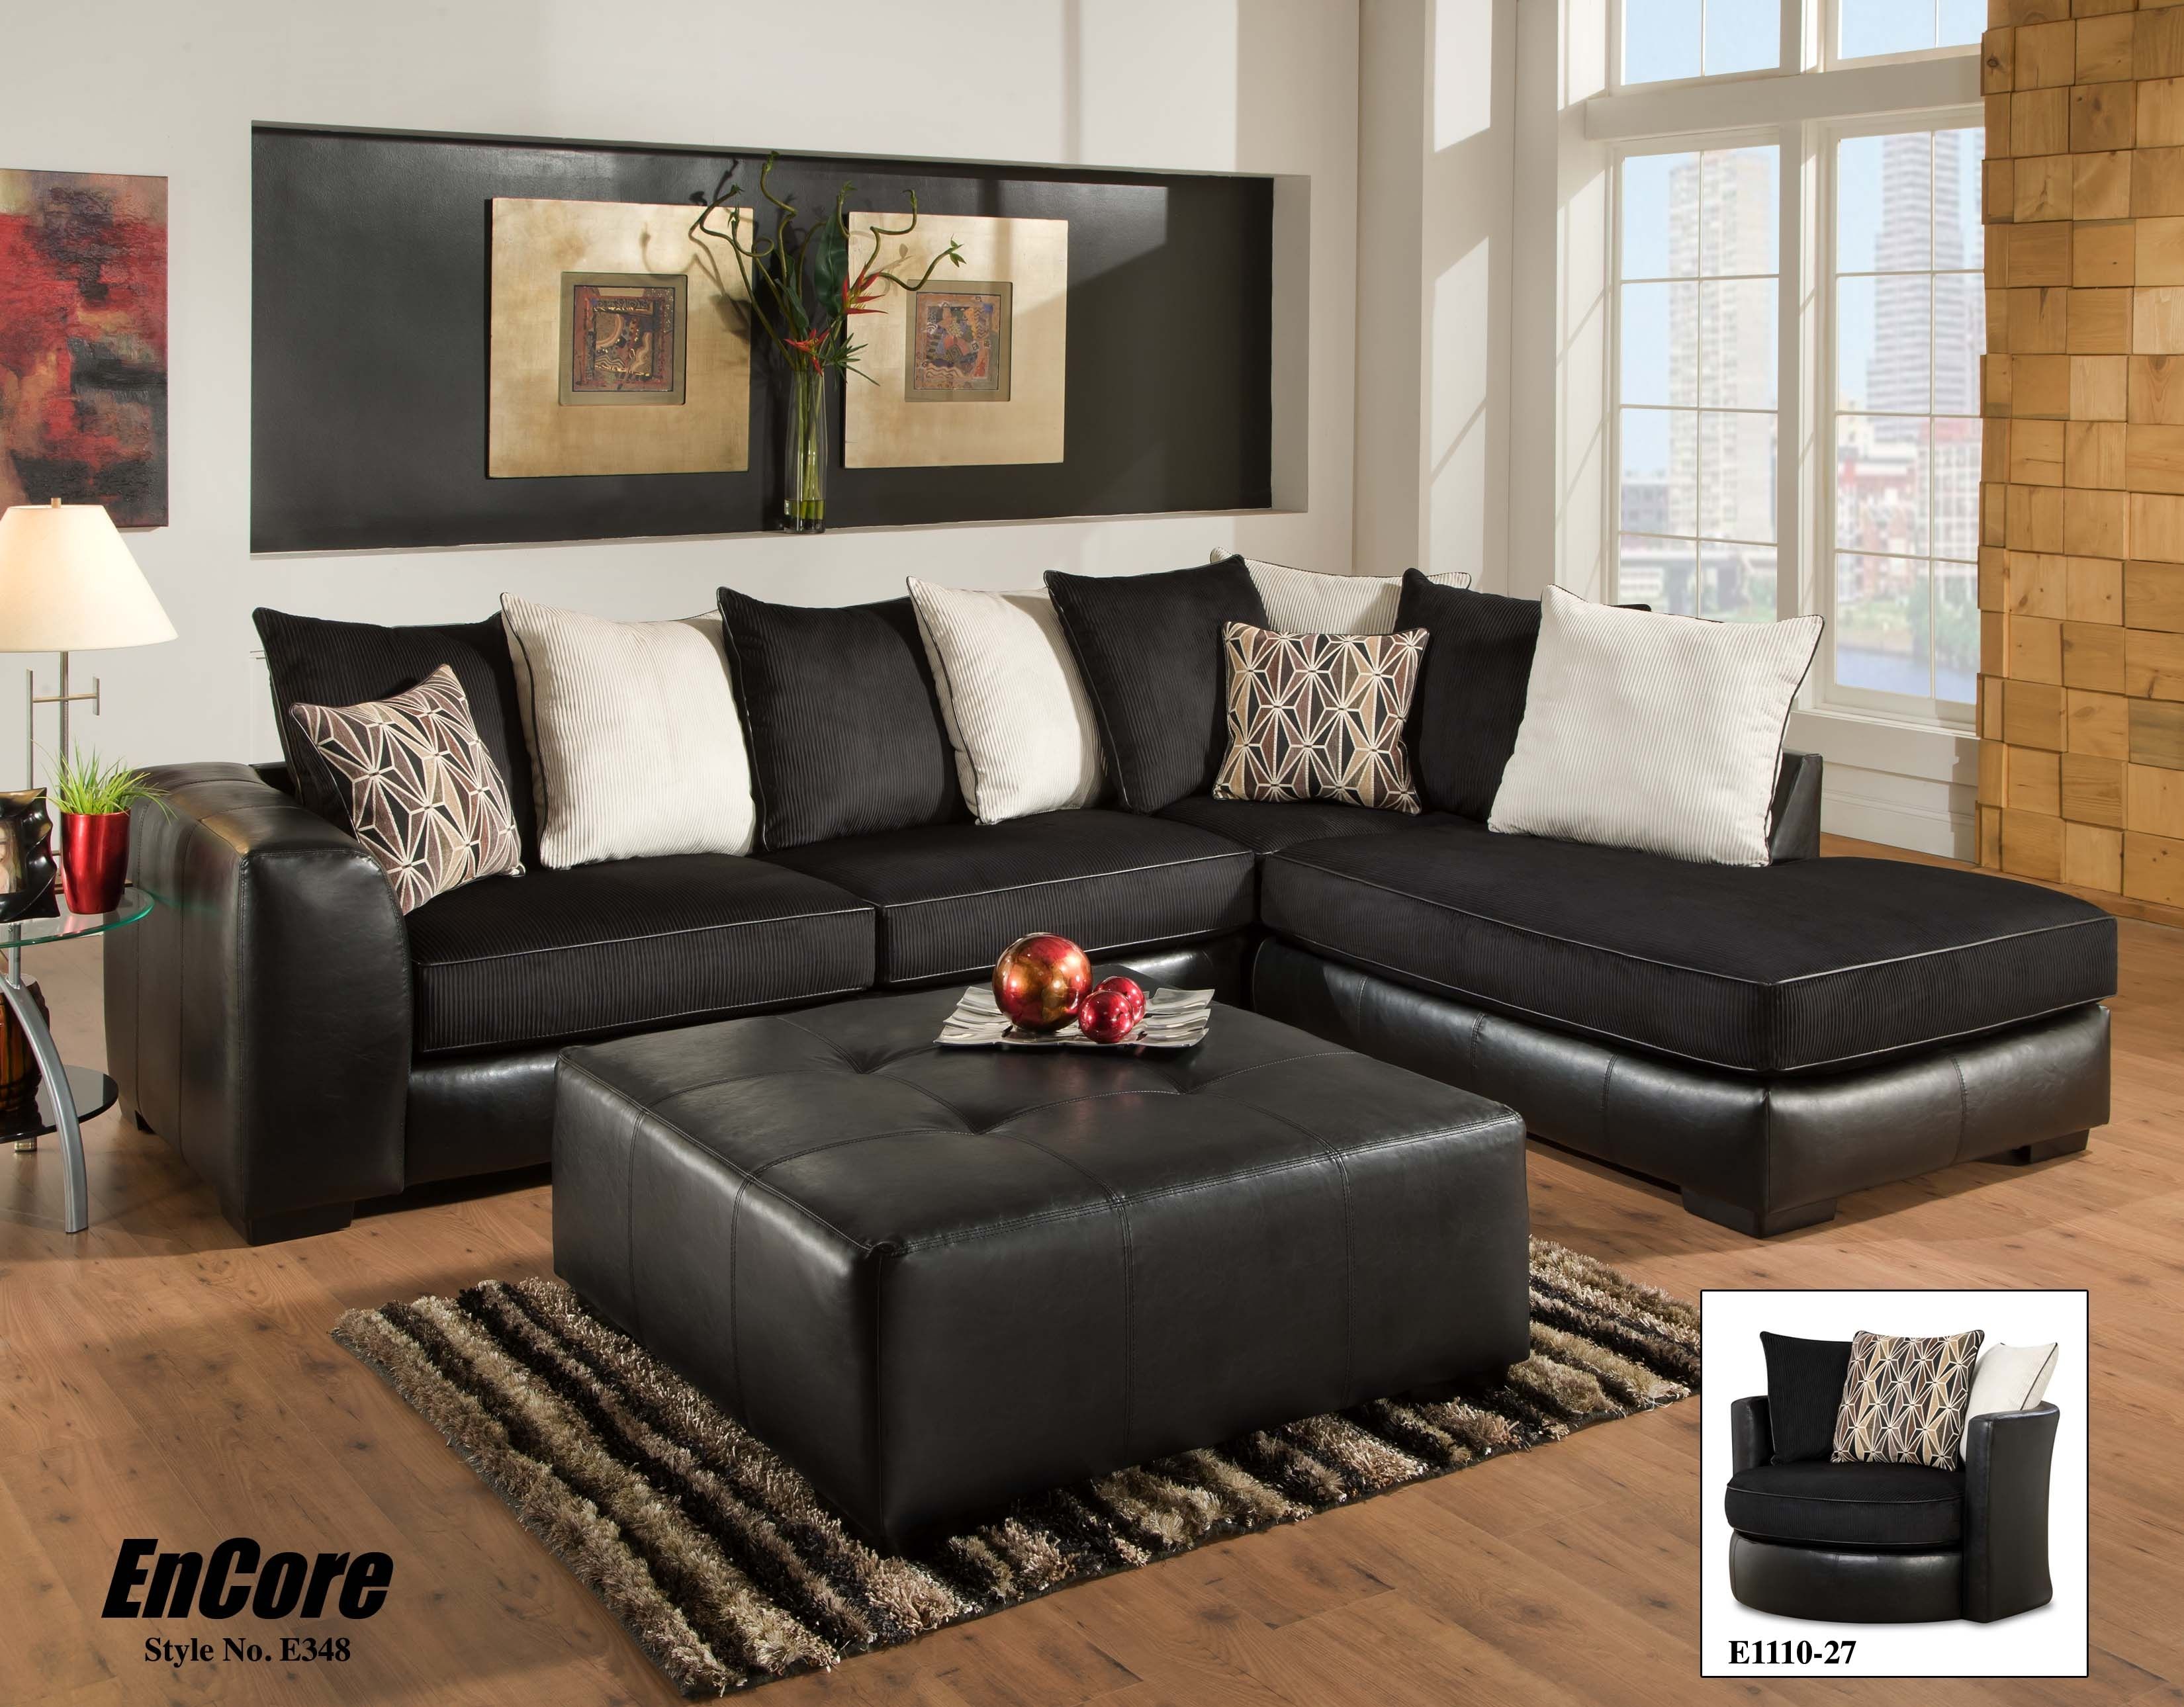 Great American Freight Sofas On Decorating American Freight Intended For Pittsburgh Sectional Sofas (View 10 of 10)